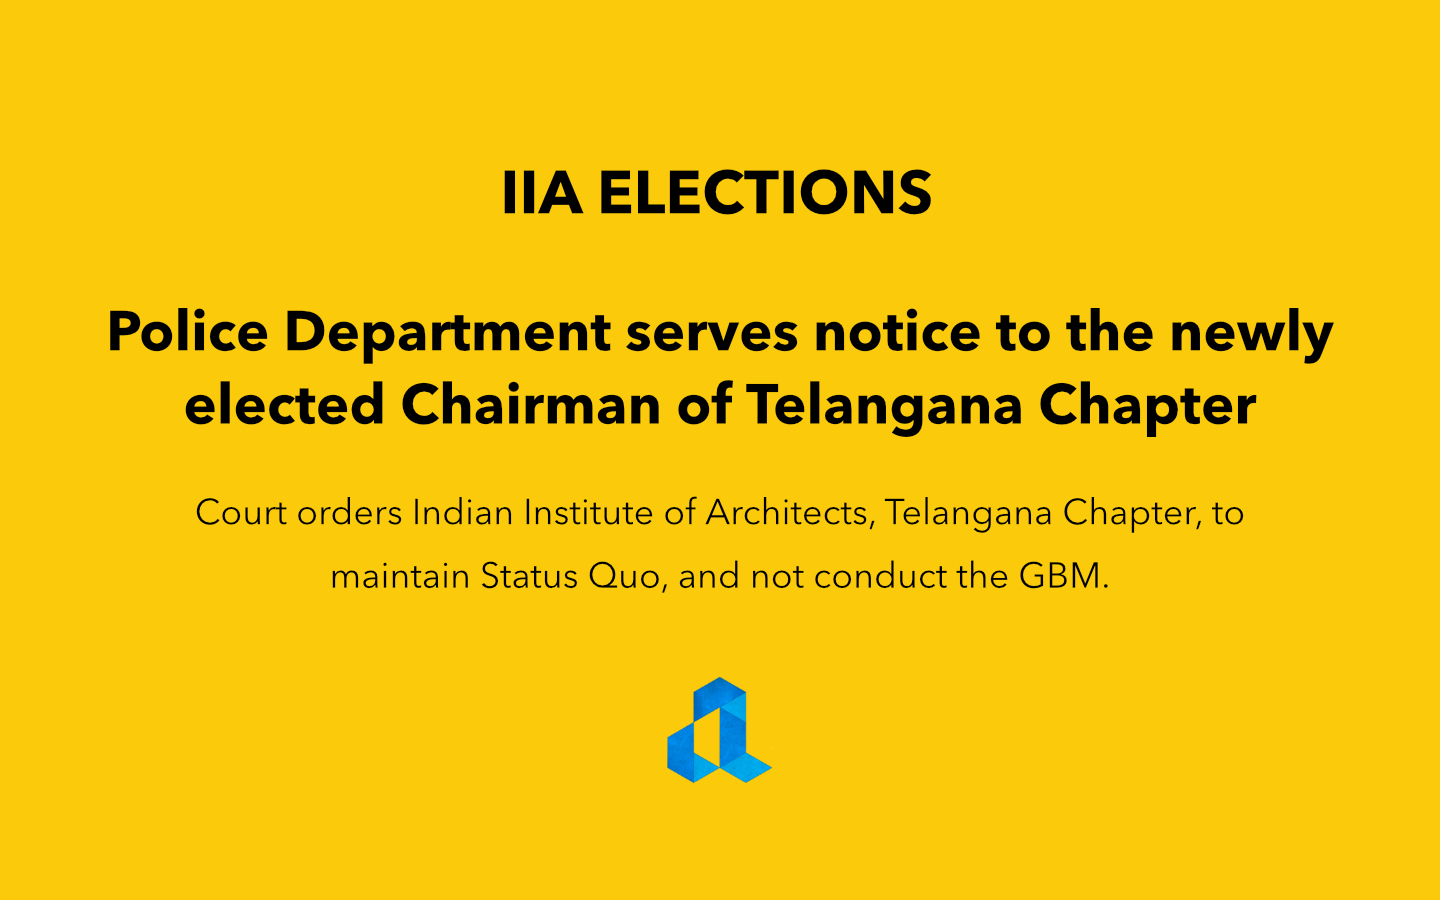 Indian Institute of architects Elections Court Order to Telangana Chapter